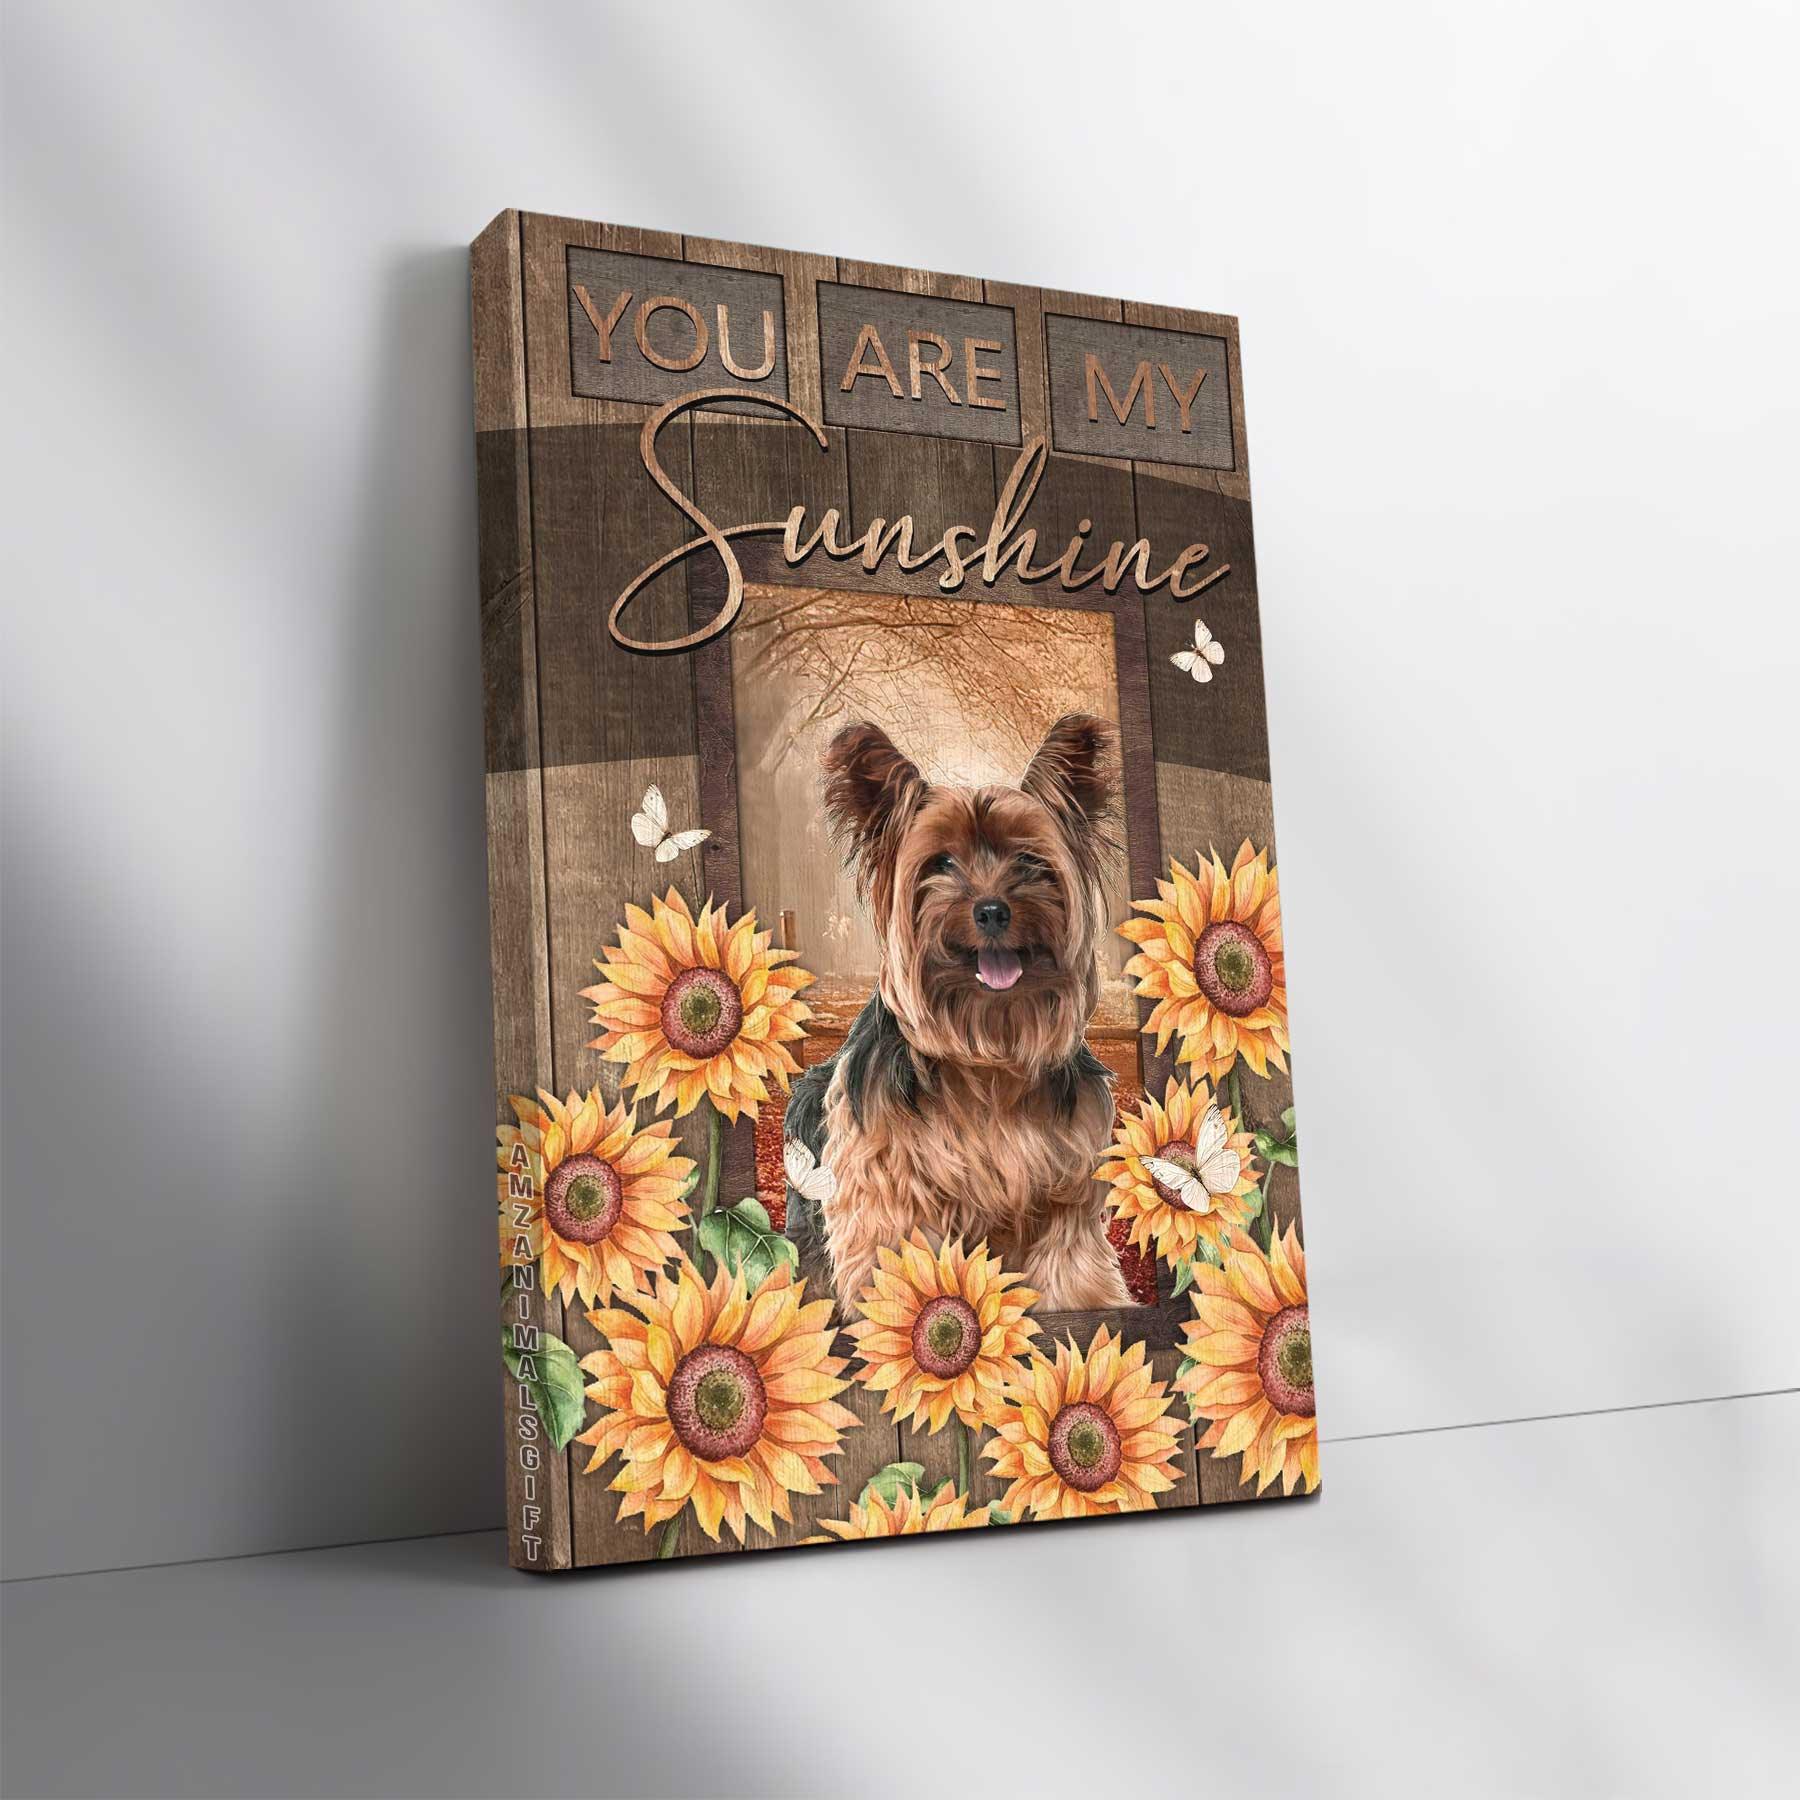 Yorkshire Terrier Portrait Premium Wrapped Canvas - You Are My Sunshine Portrait Canvas - Gift For Family, Friends, Dog Lovers - Amzanimalsgift